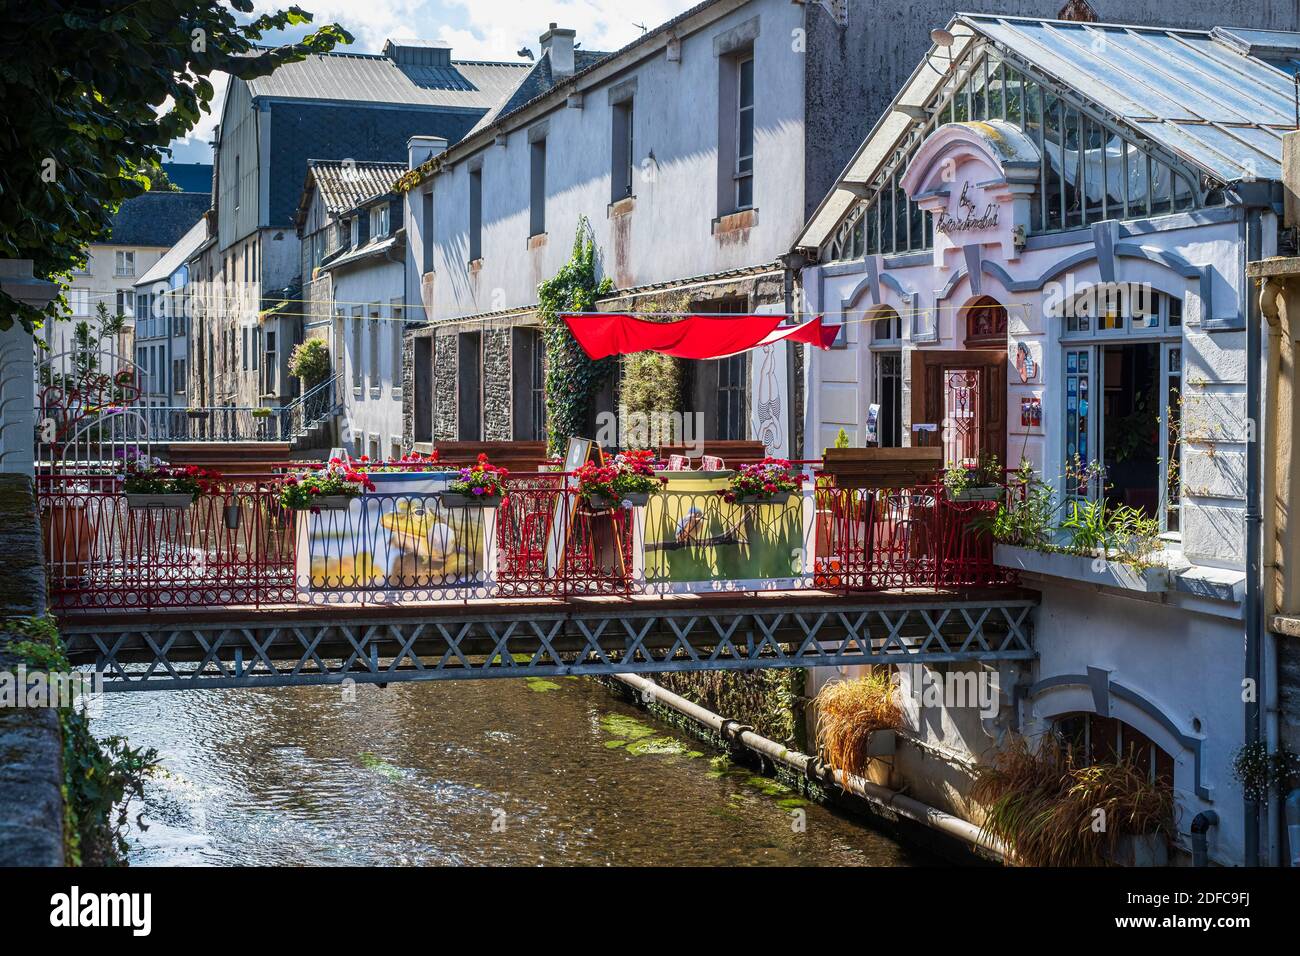 France, Finistere, Morlaix, Le Bains Douches restaurant on the banks of the  Jarlot river Stock Photo - Alamy